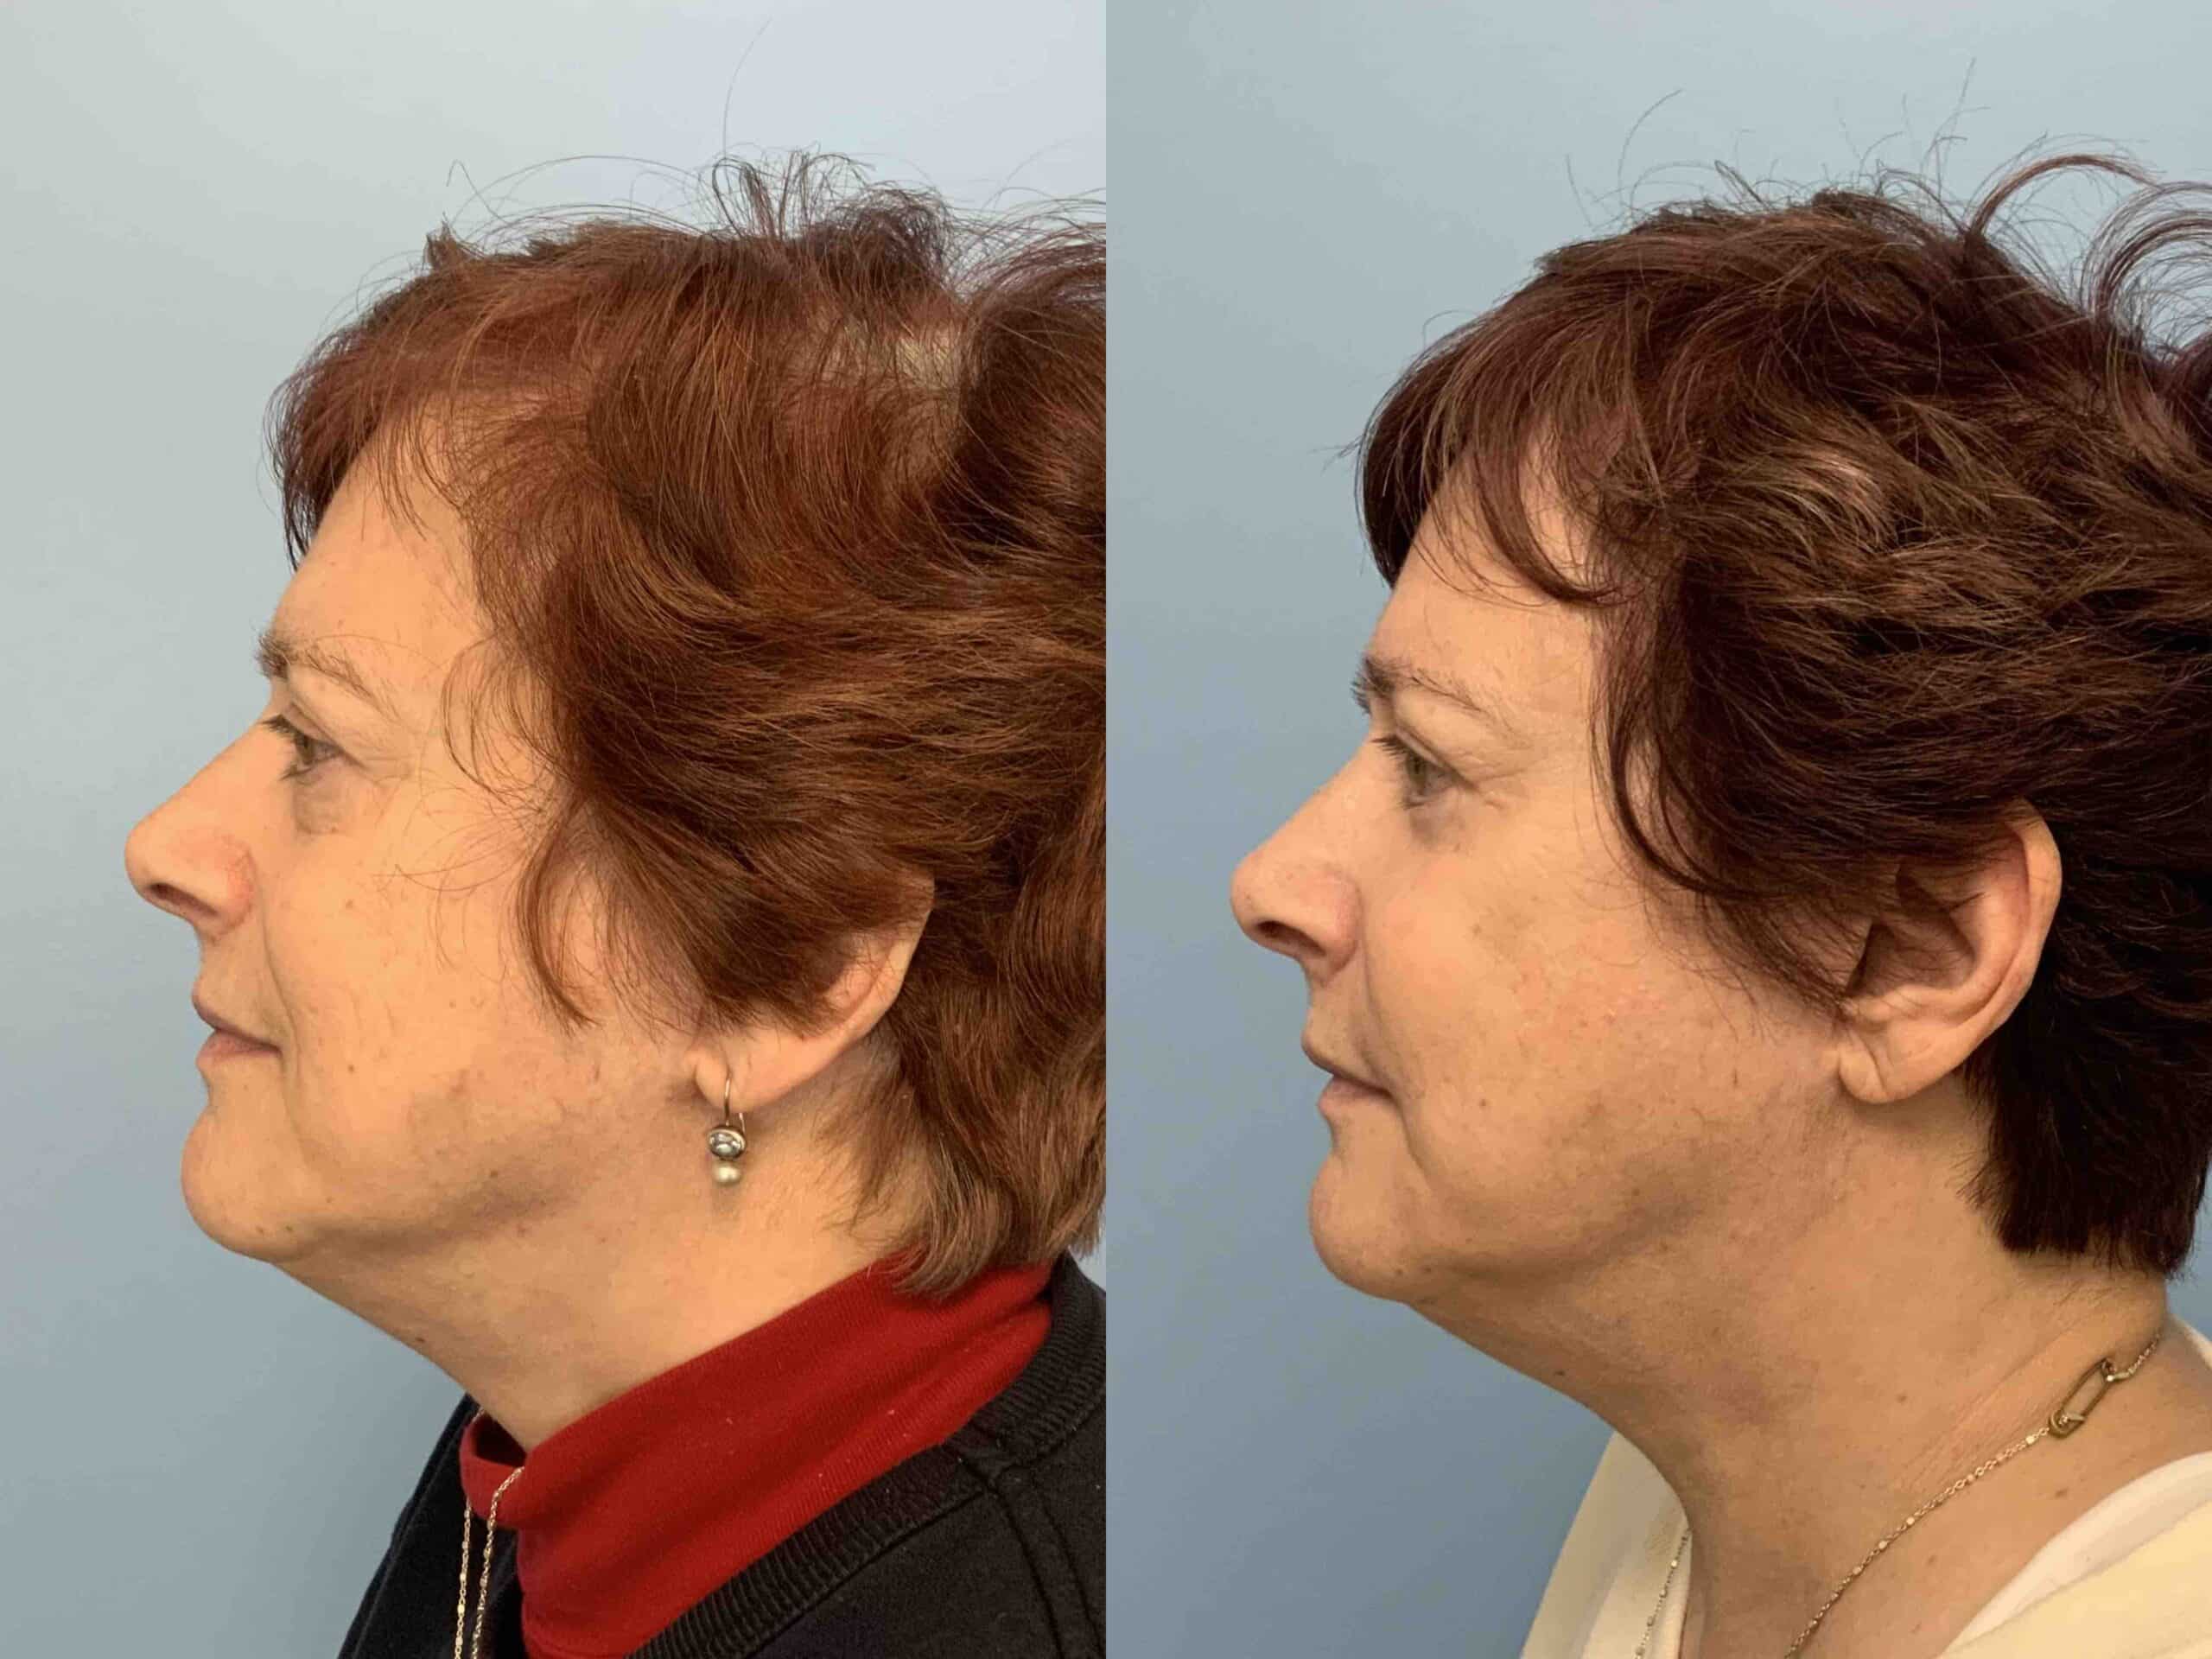 Before and after, 2y 8mo post op from Lower Blepharoplasty, Canthopexy performed by Dr. Paul Vanek (side view)